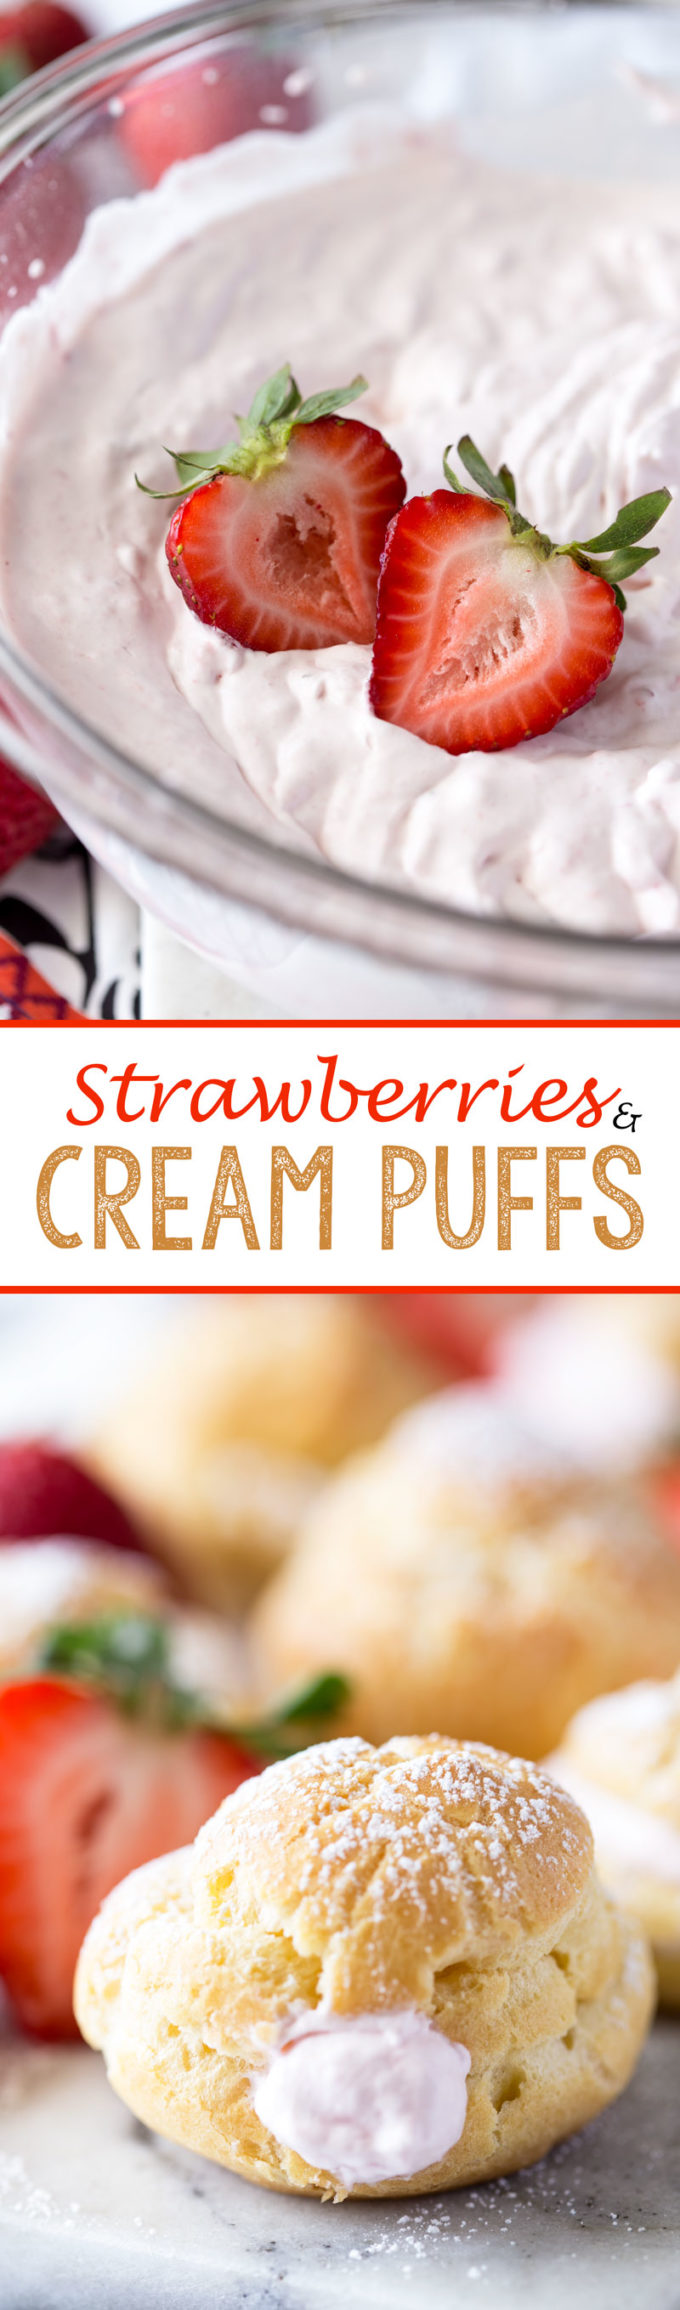 I could barely wait for the puffs to cool, I wanted to gobble them down! Strawberries and Cream Puffs!